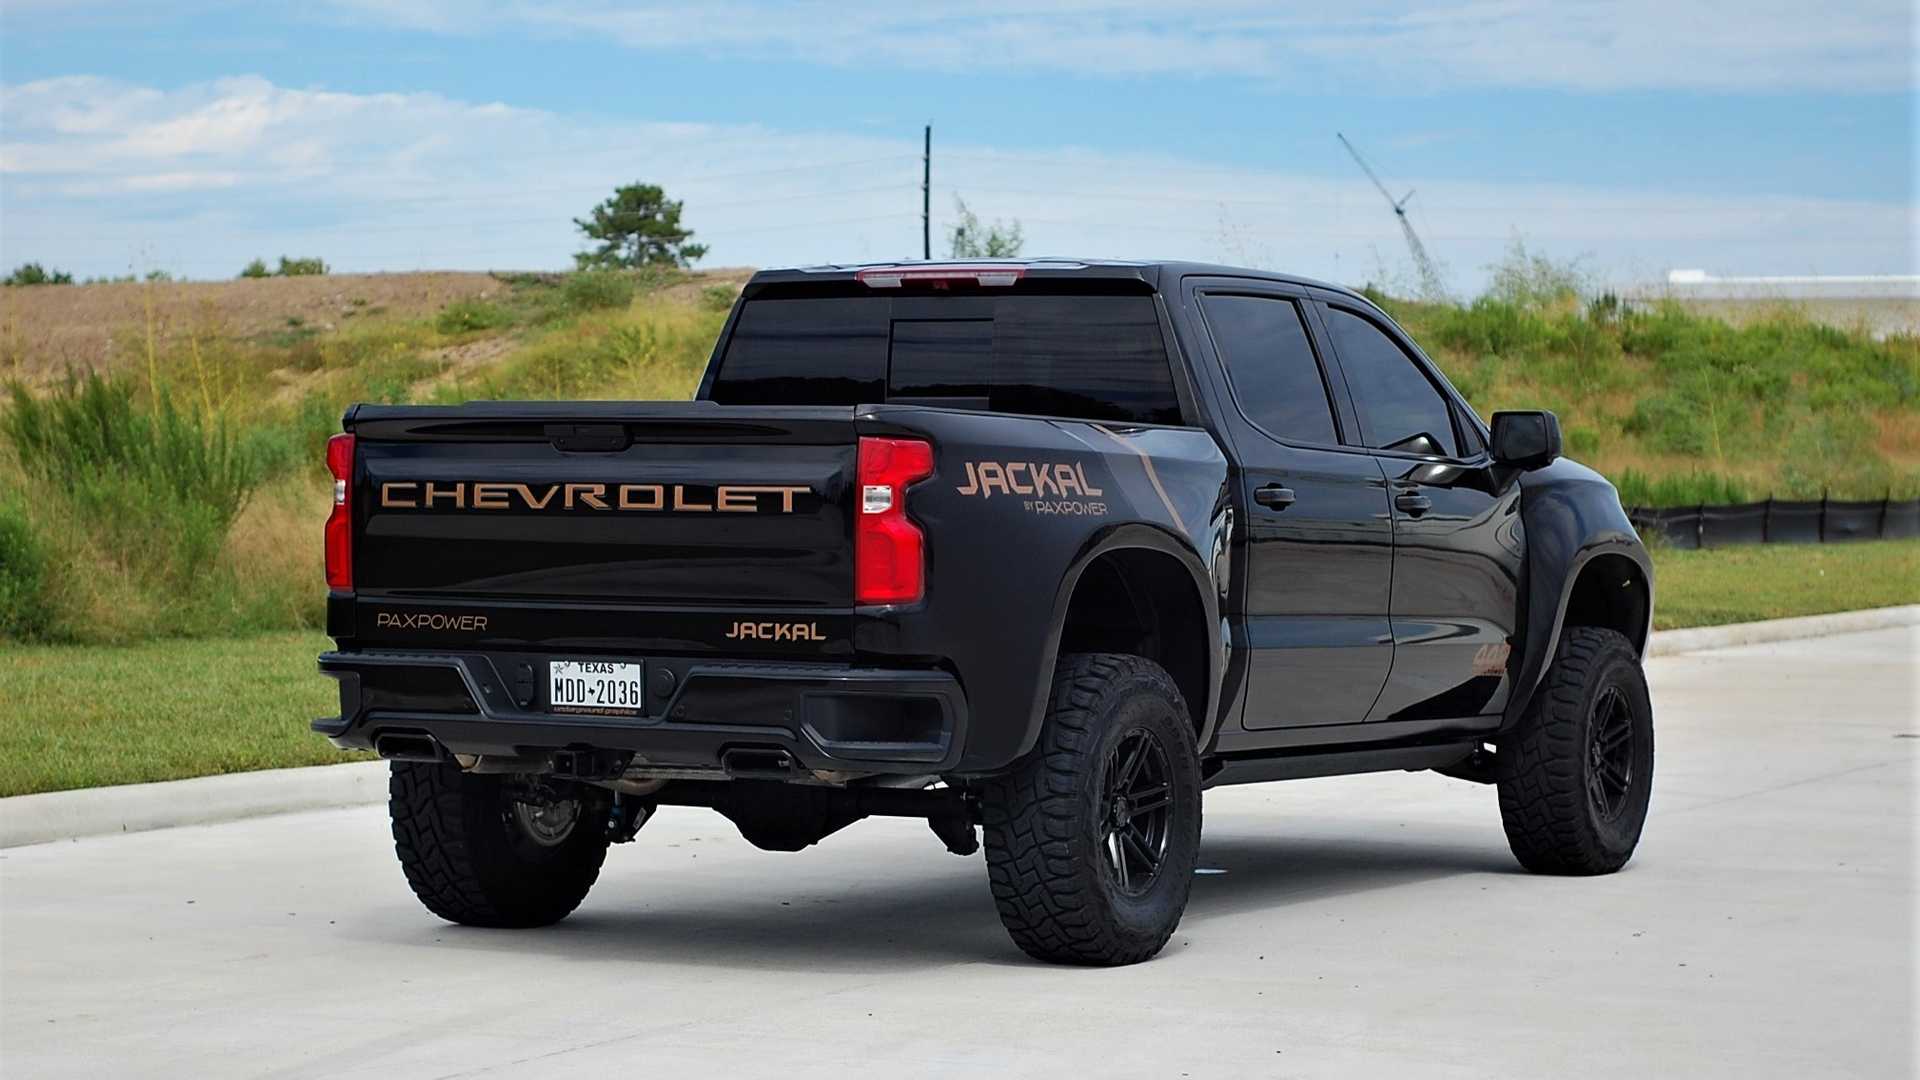 TFL Checks Out the 650-HP "PaxPower Jackal" 2021 Chevrolet Silver...